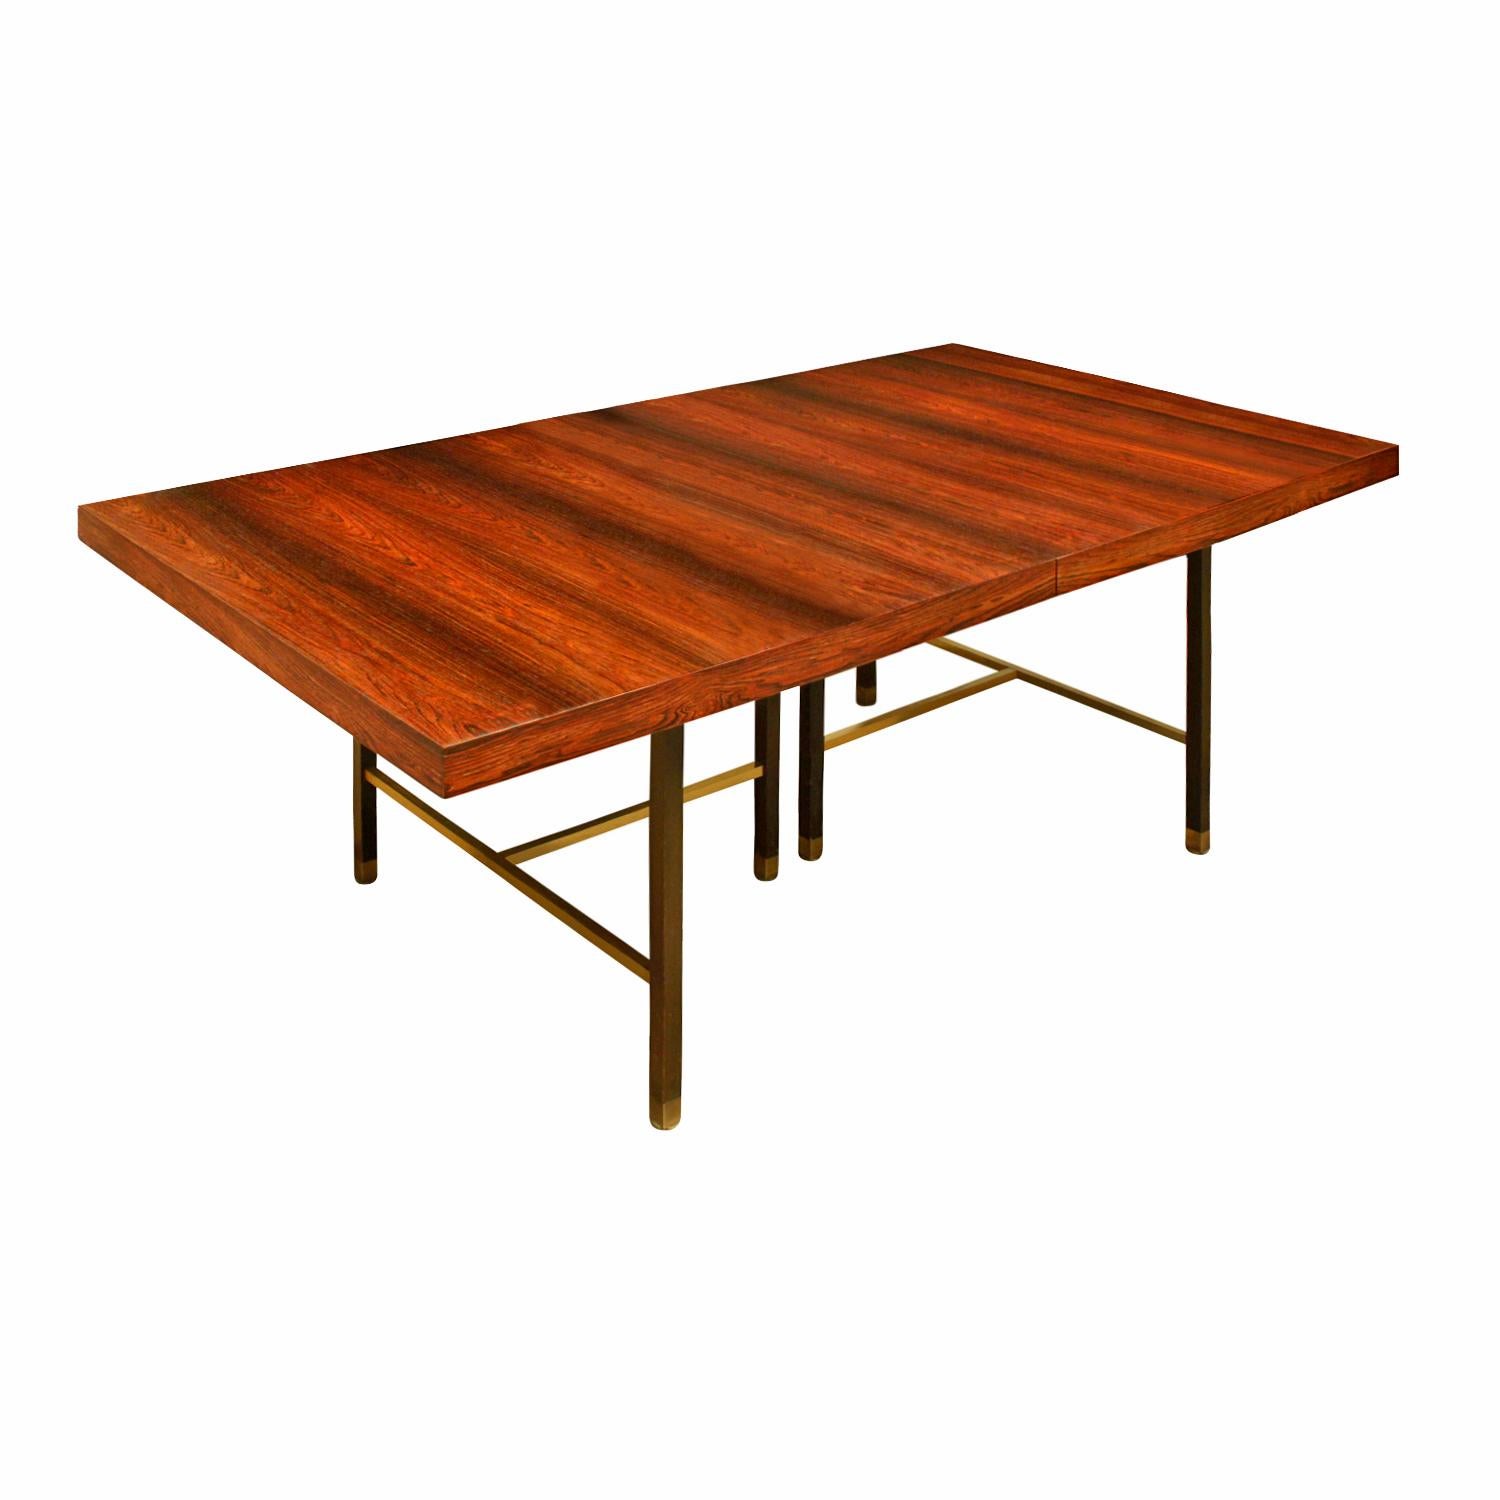 Mid-Century Modern Harvey Probber Dining Table With 2 Leaves In Brazilian Rosewood 1950s (Signed)